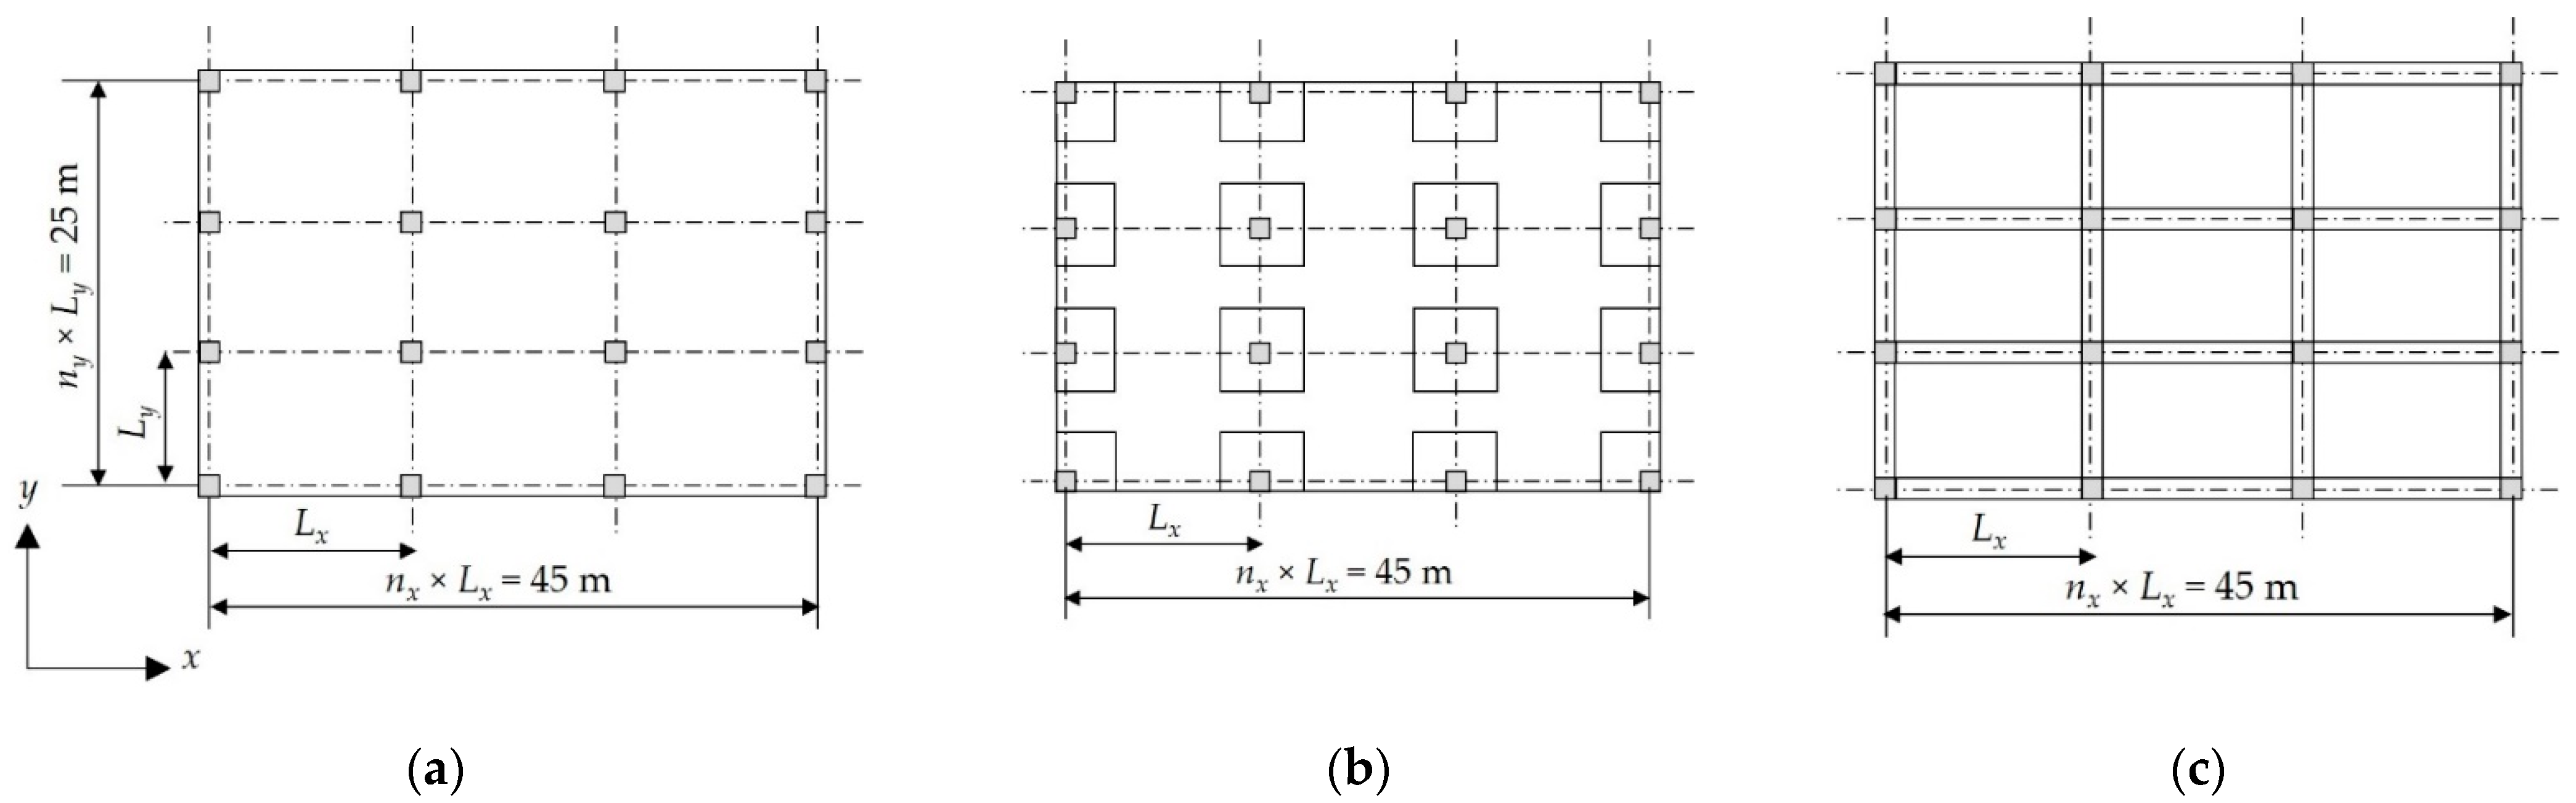 Materials Free Full Text Effects Of Concrete Grades And Column Spacings On The Optimal Design Of Reinforced Concrete Buildings Html